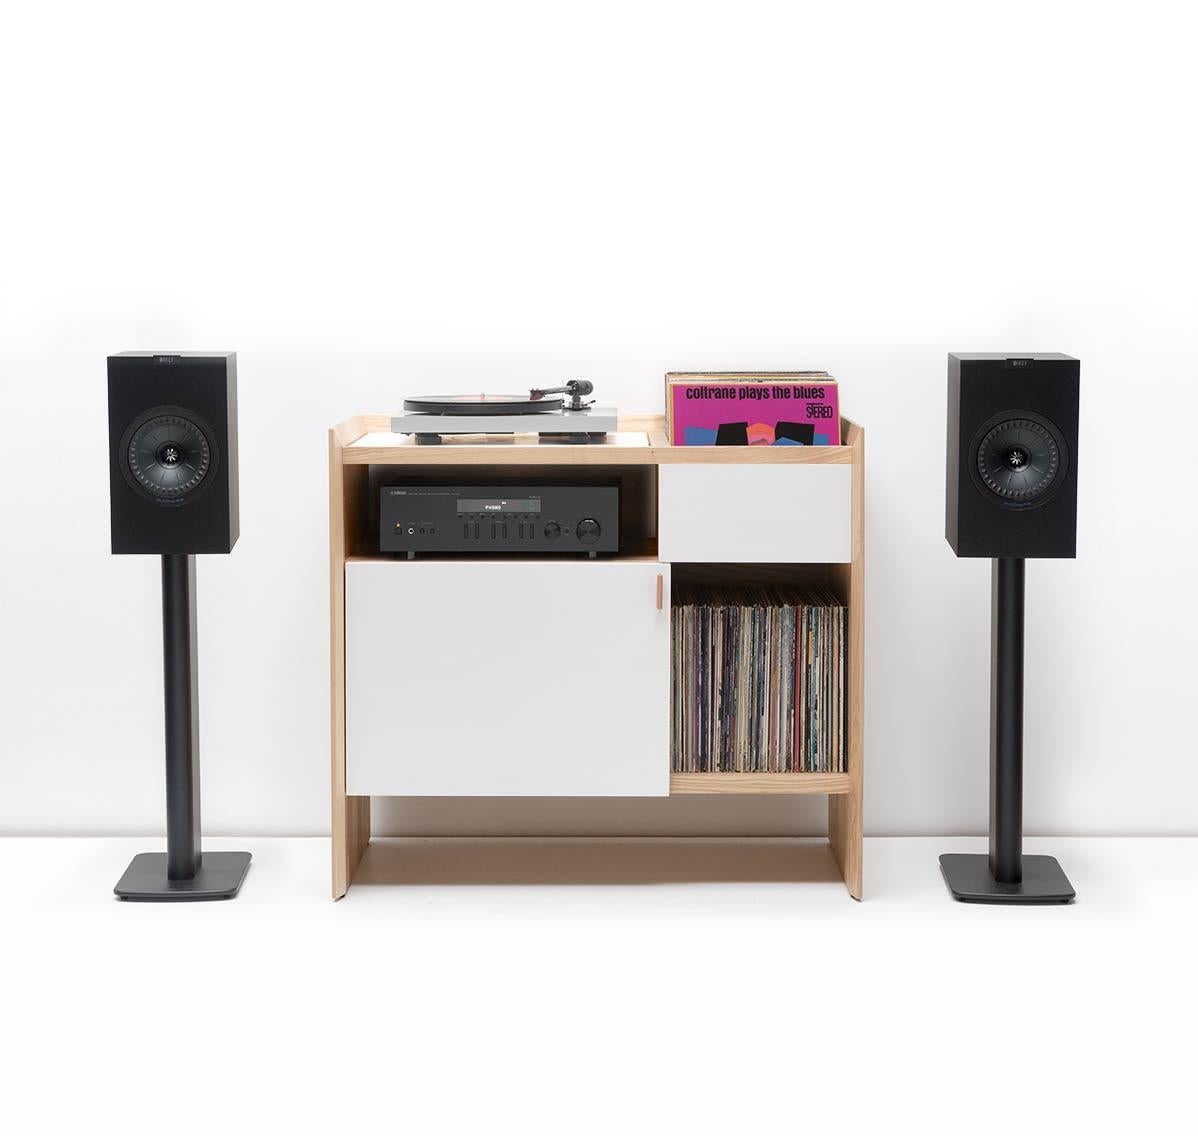 An all-in-one solution, Unison combines both audio gear and record storage into a beautifully designed single piece of solid wood furniture. When flanked with floor standing speakers Unison creates the ultimate dedicated entertainment furniture